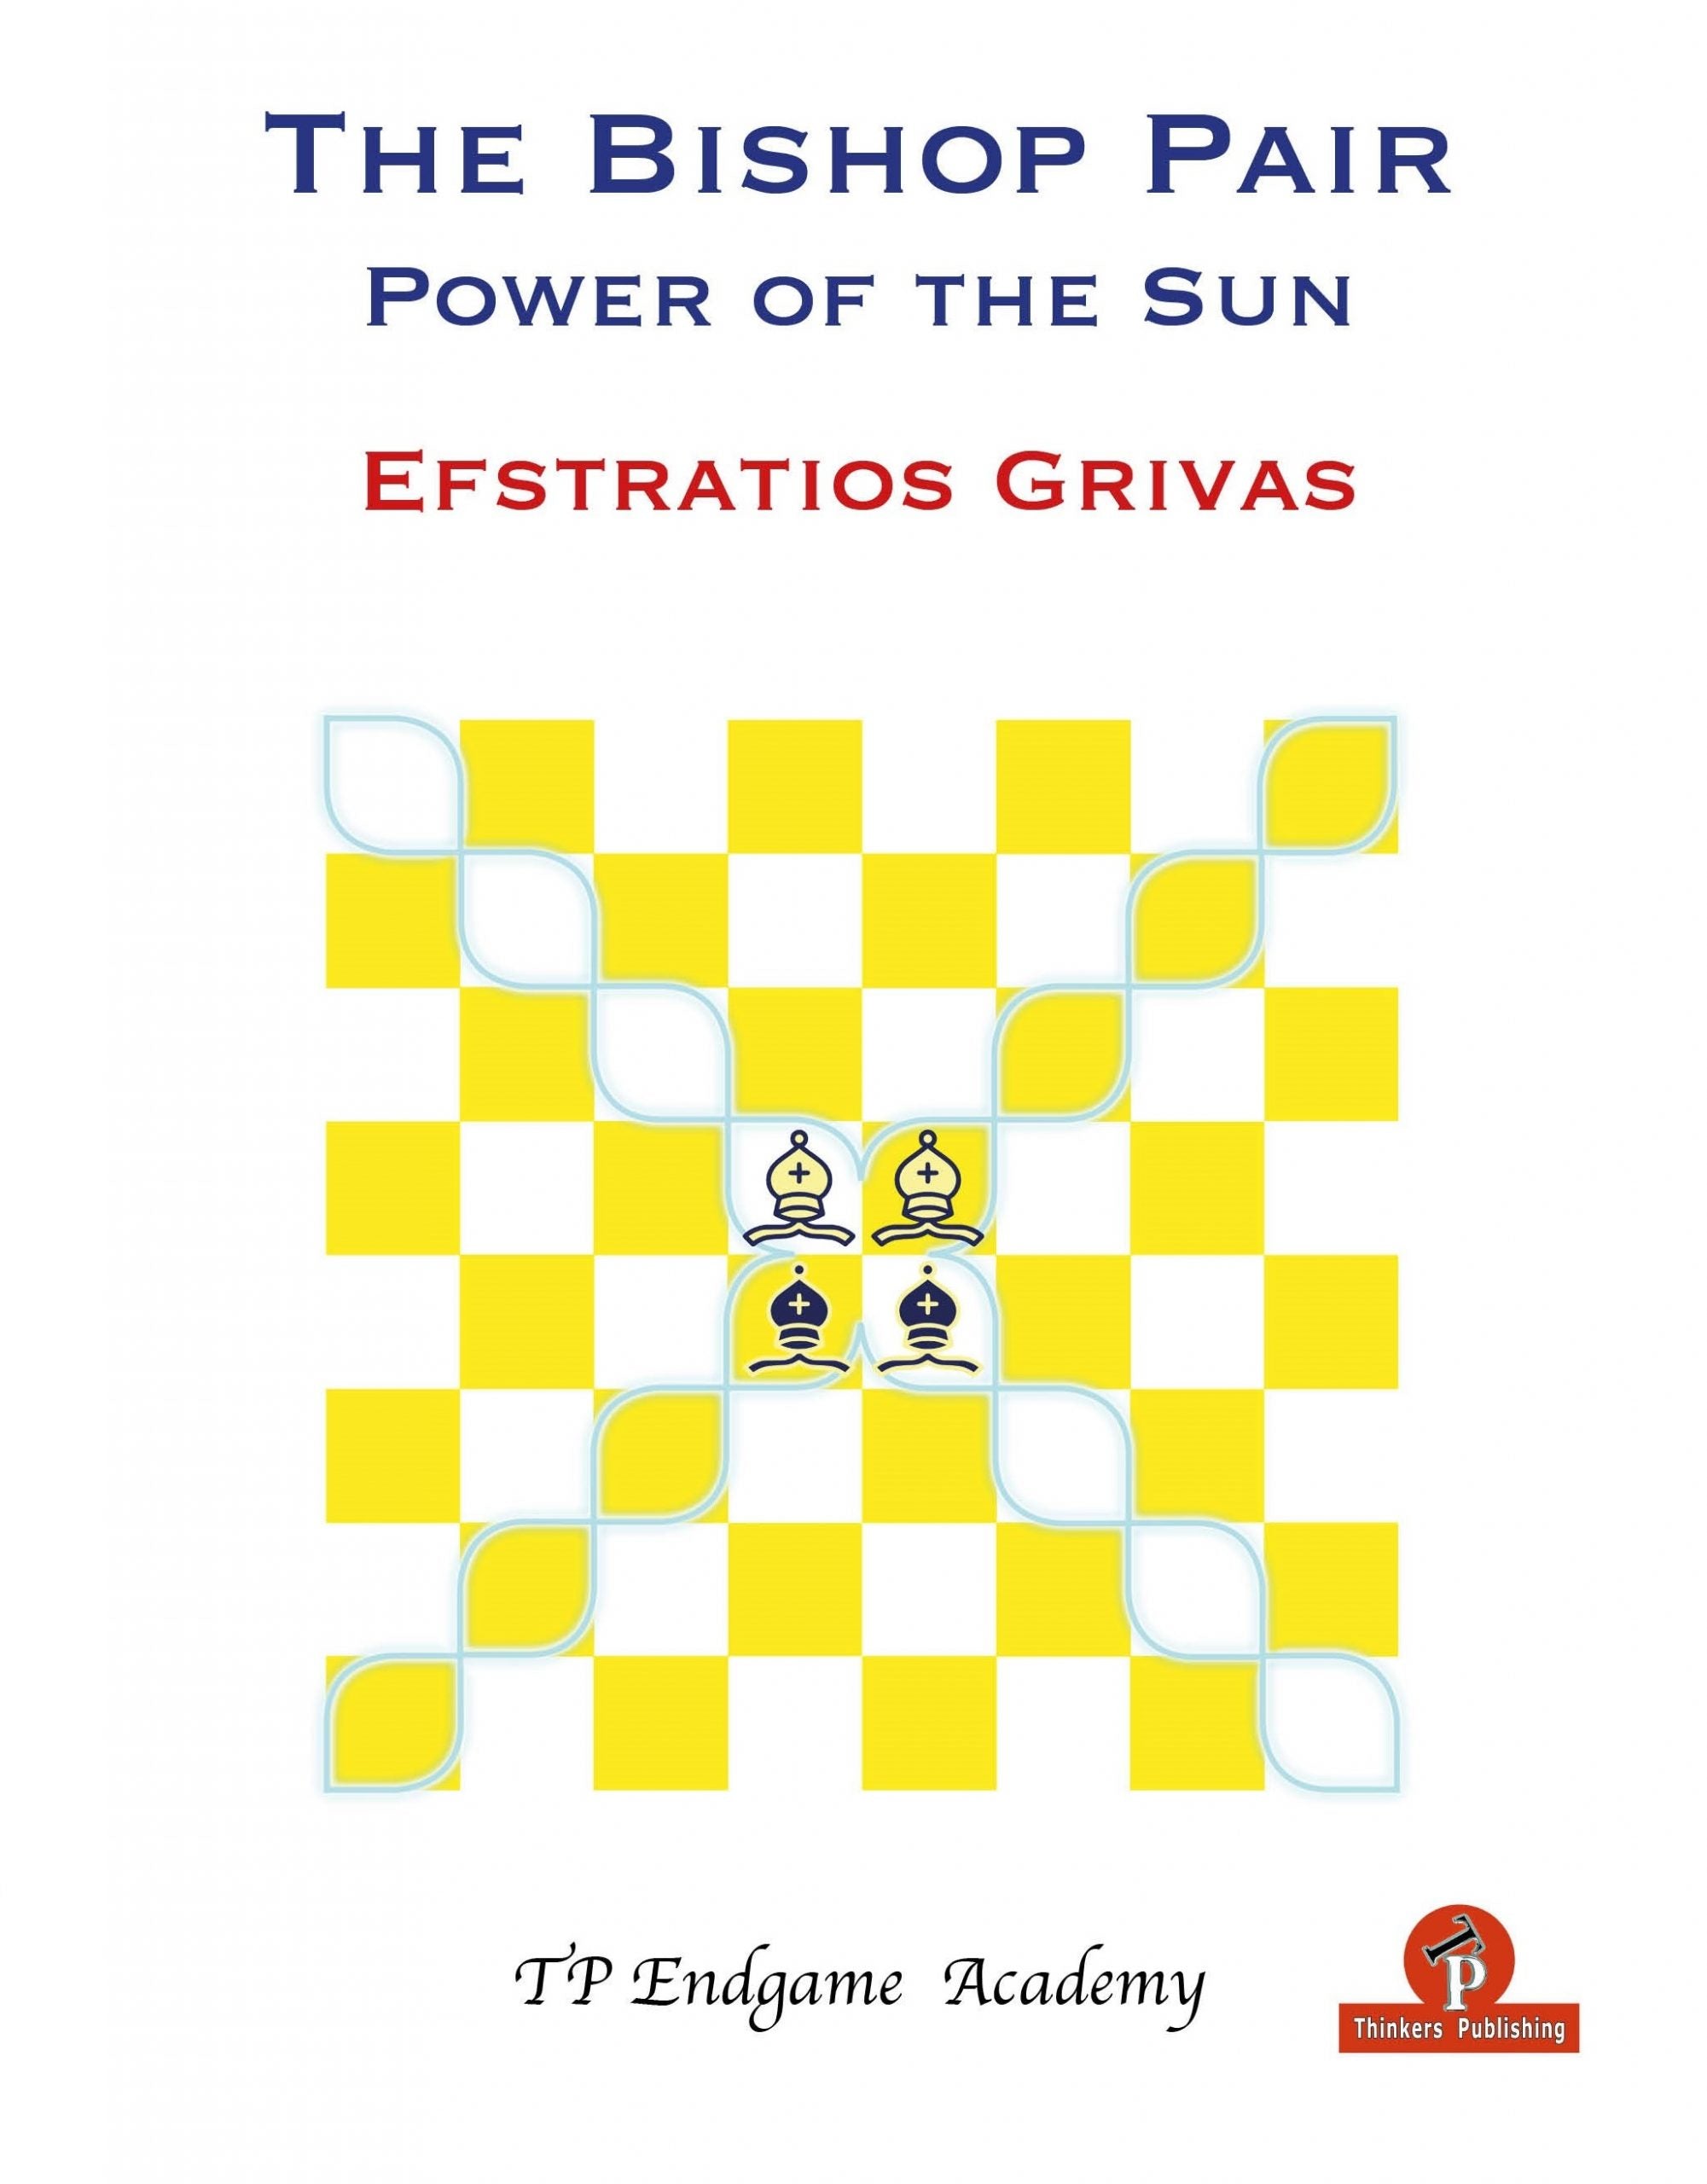 Grivas: The Bishop Pair - Power of the Sun